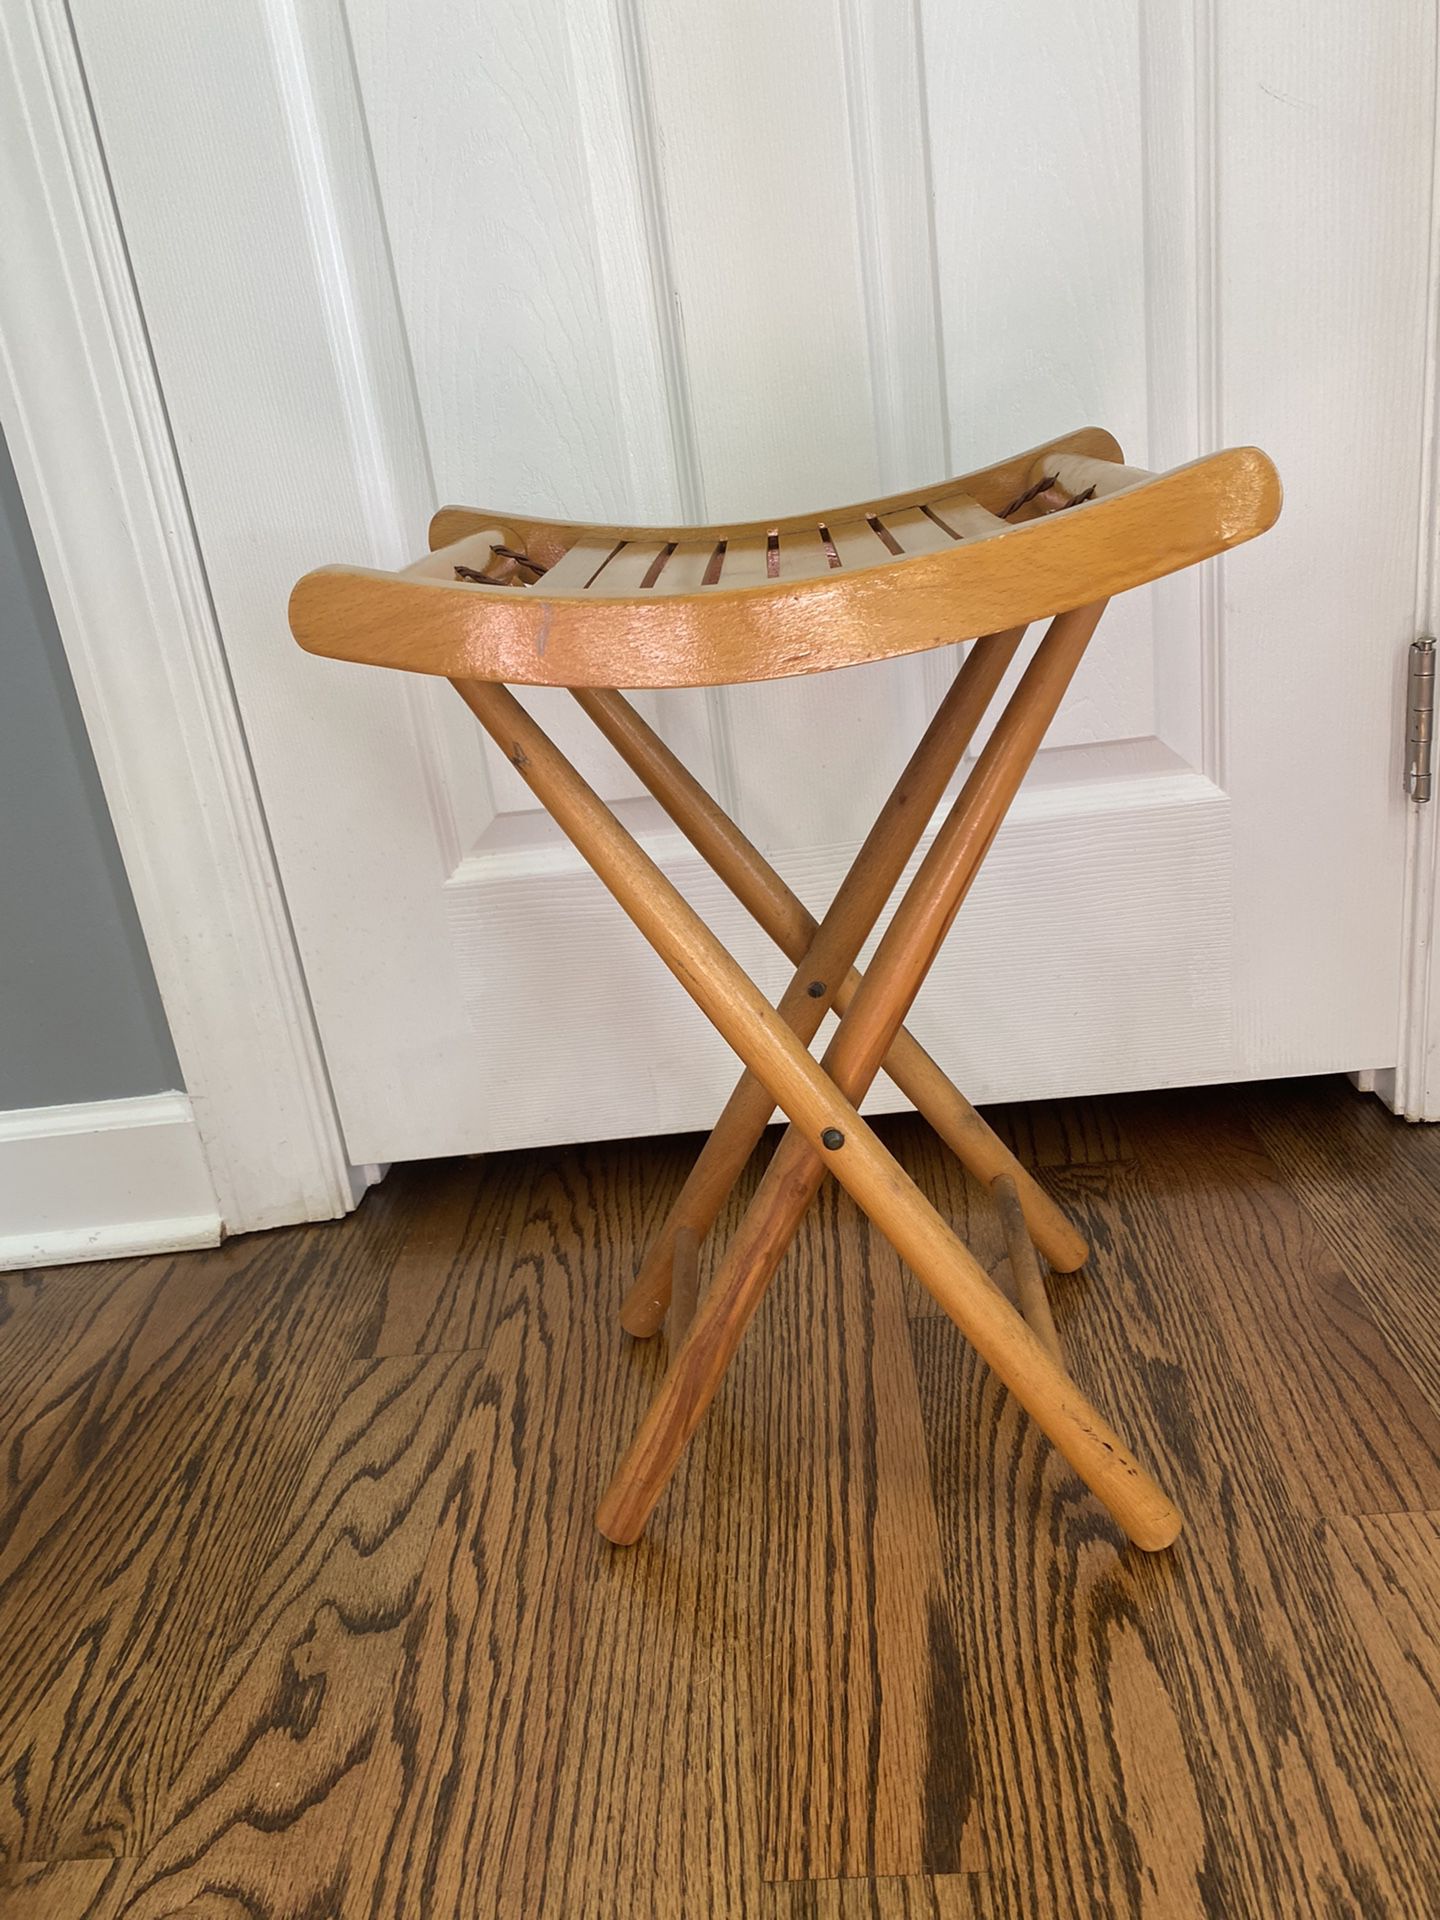 Wooden Stool - Portable & Collapsible 